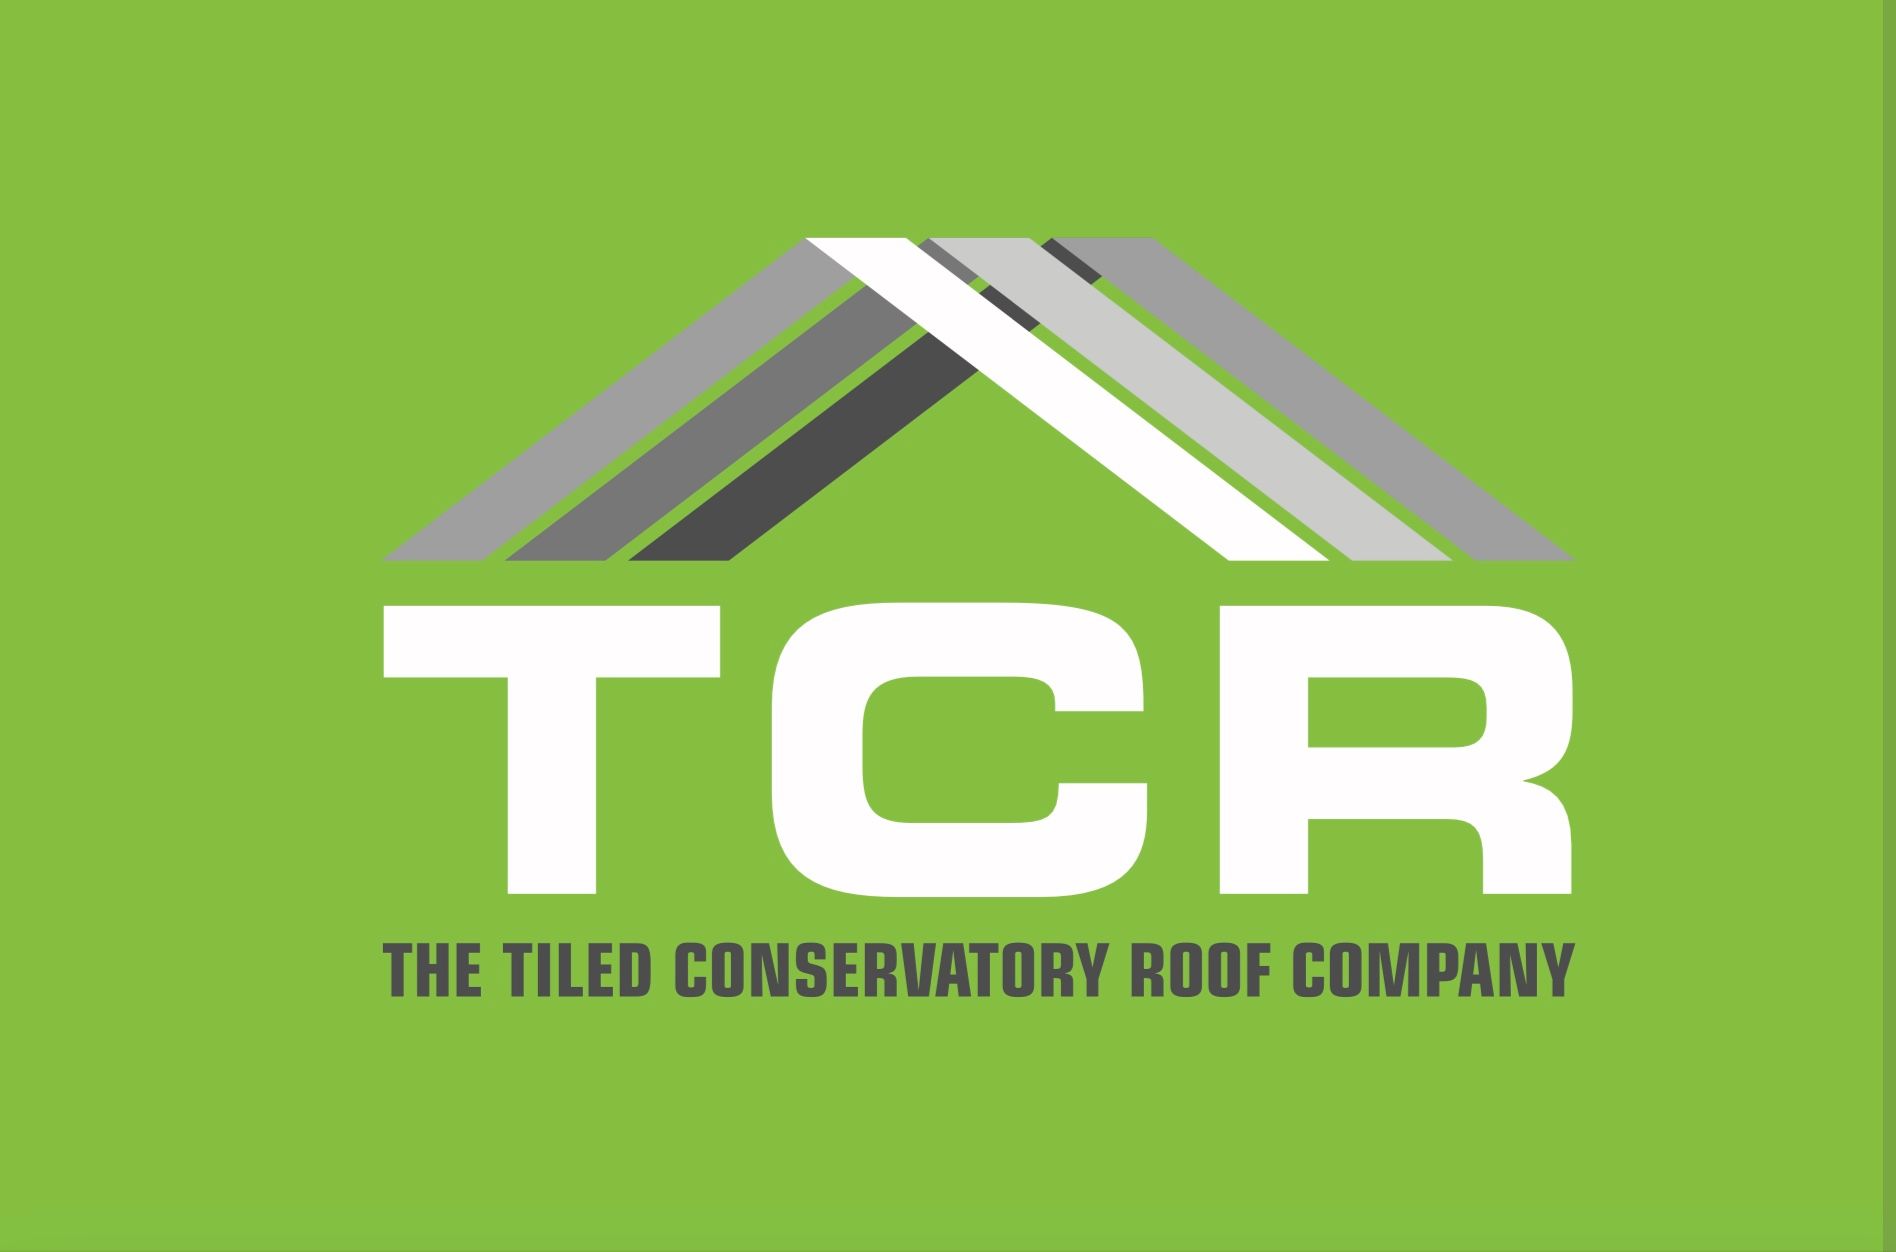 The Tiled Conservatory Roof Company